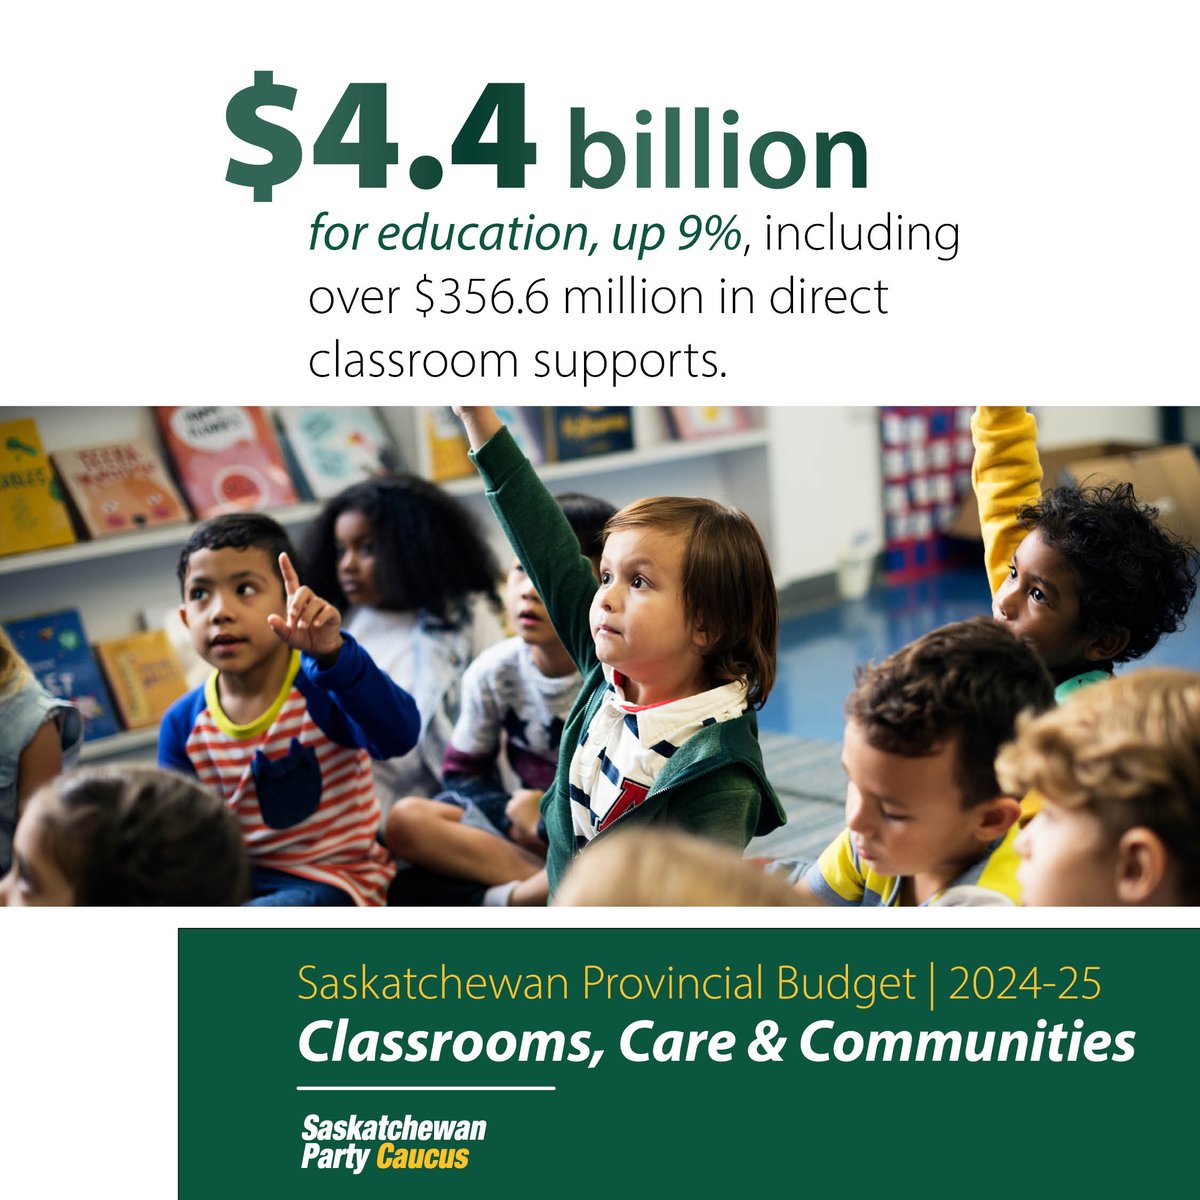 We are investing in what teachers and students have told us matter the most. Overall, this budget provides $356.6 million in classroom supports and is a significant commitment to address classroom size and complexity. Learn more at Saskatchewan.ca/budget.